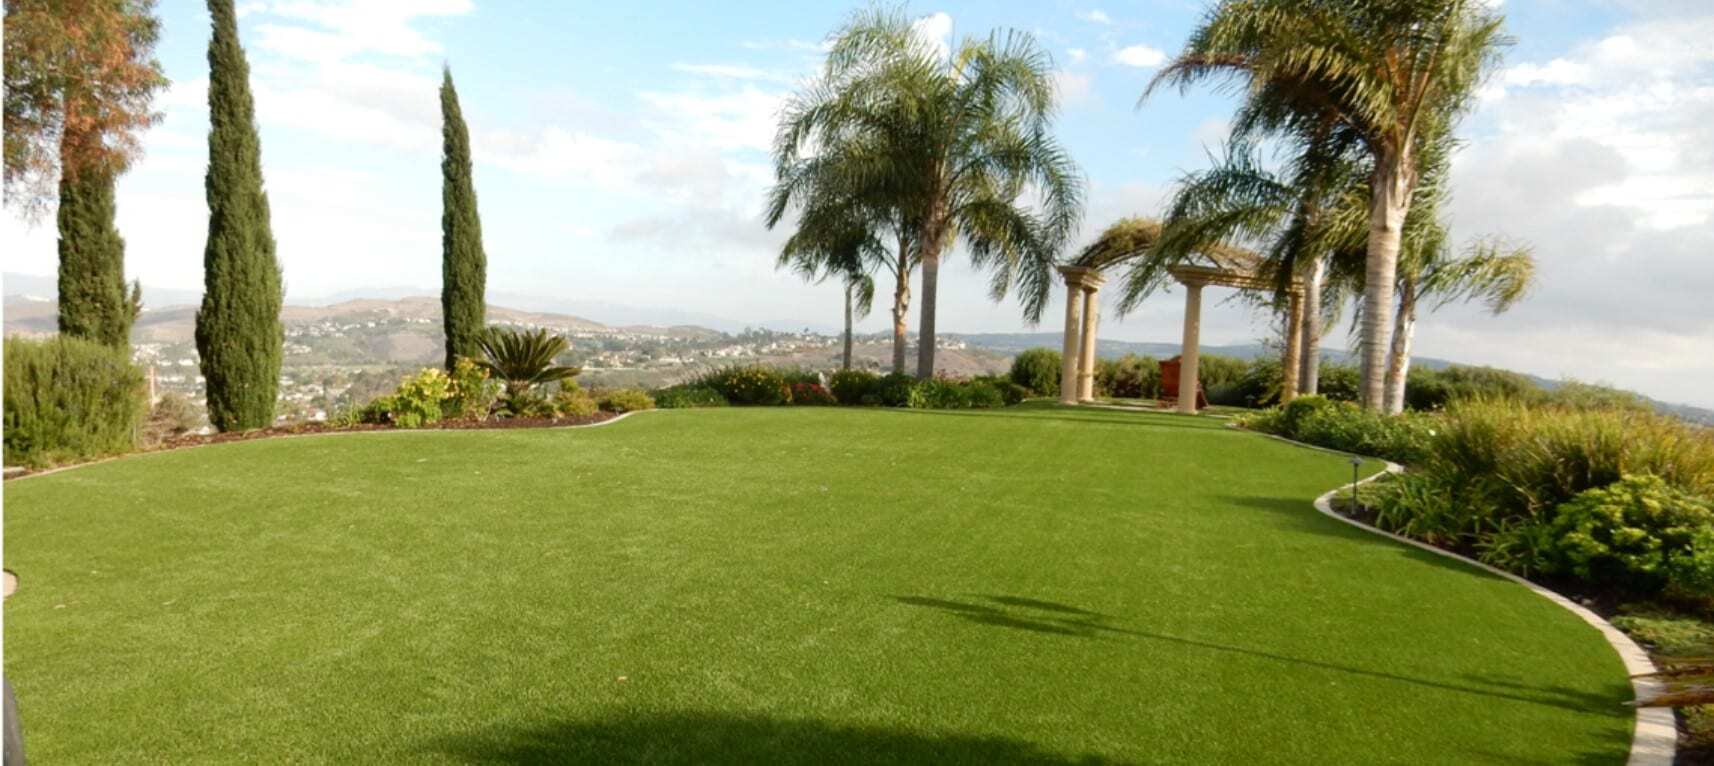 Green-R Turf Artificial Grass, Pavers of Orange County - Lawns, Pet Areas